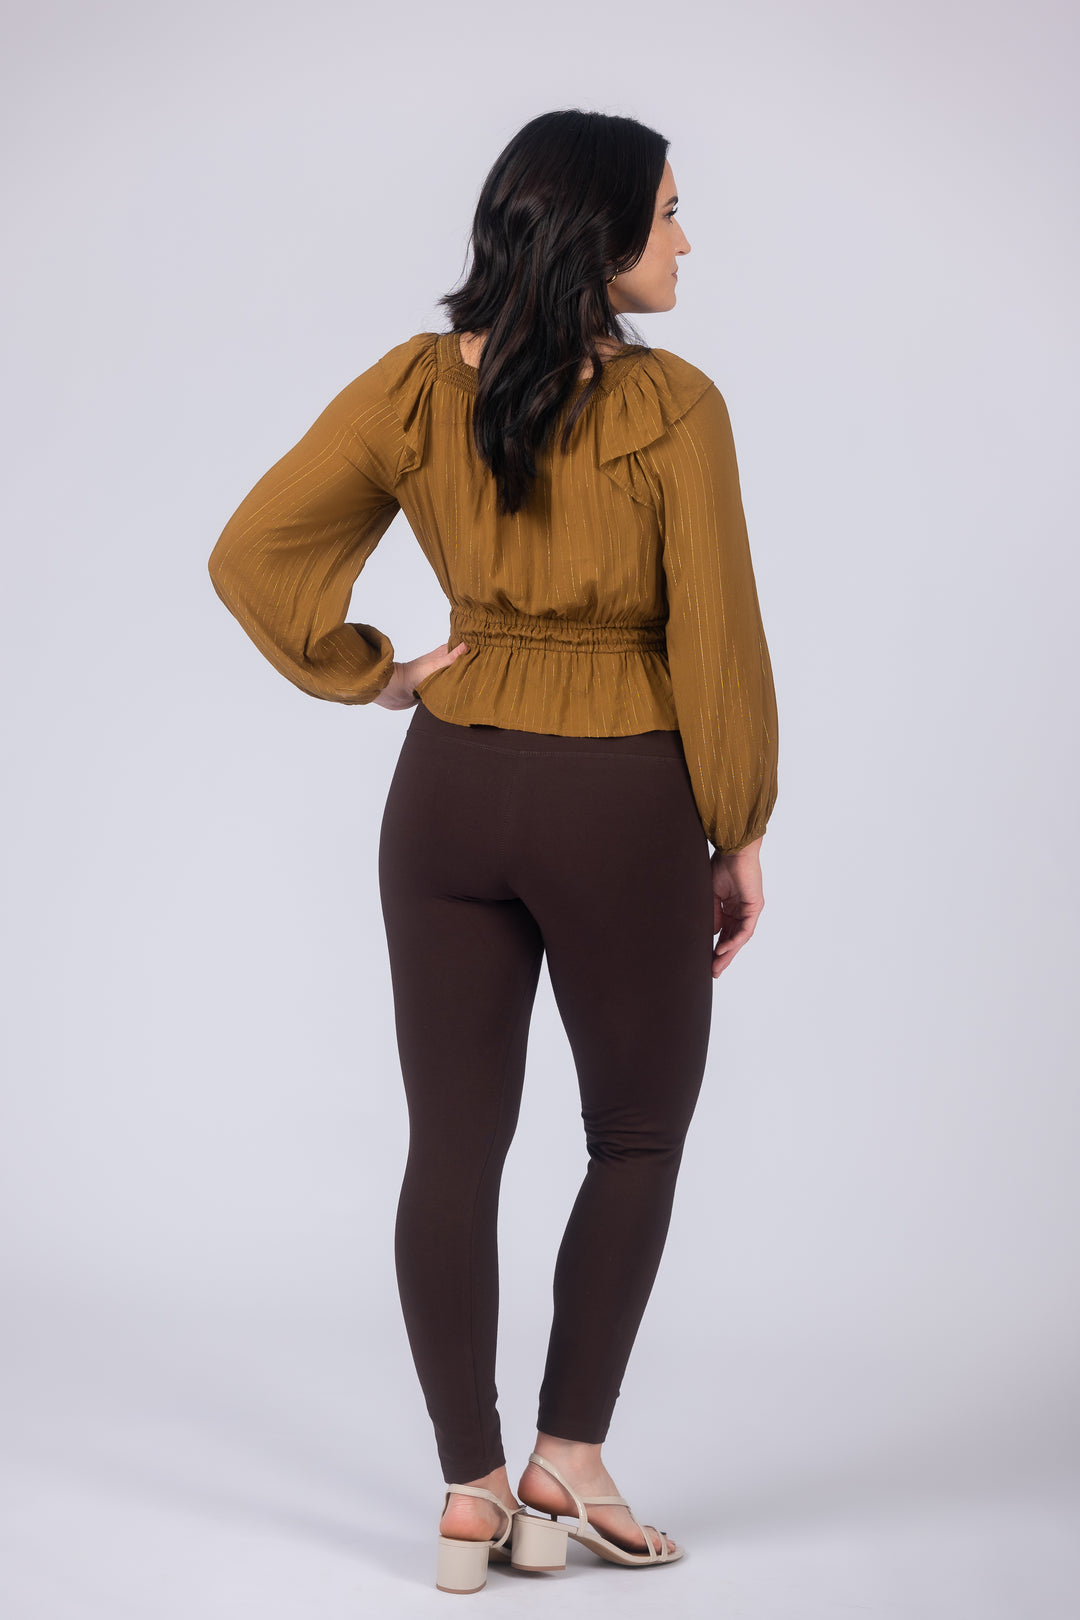 Act Of True Love | Curvy Leggings | Made in the USA